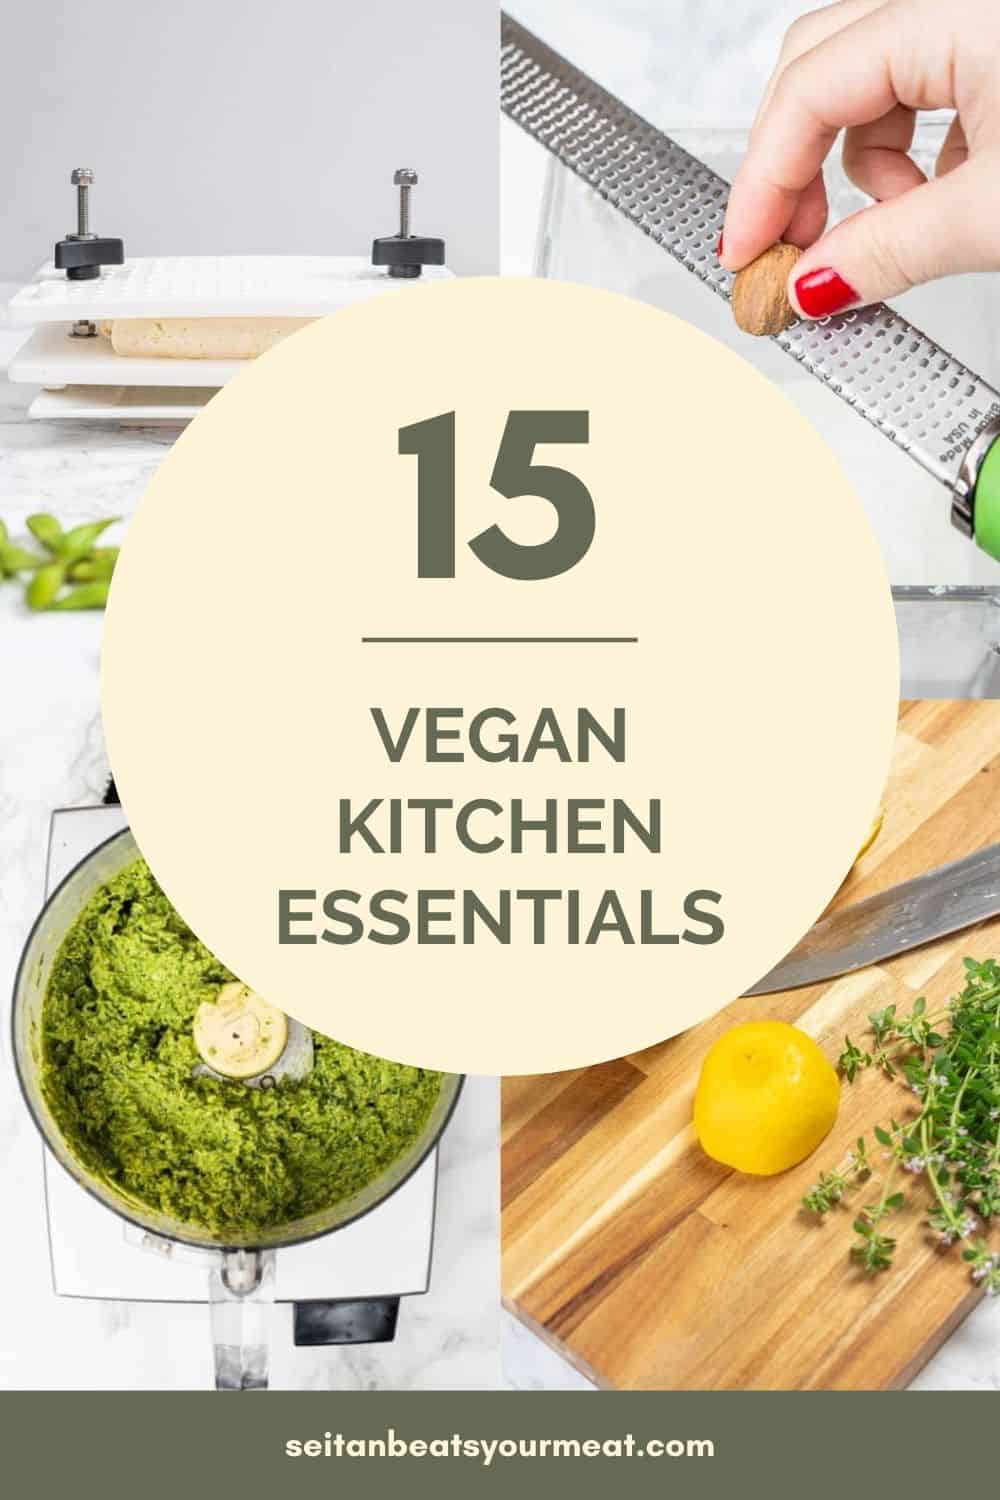 Vegan Kitchen Essentials 2021 (MUST-HAVE Cooking Tools for Every